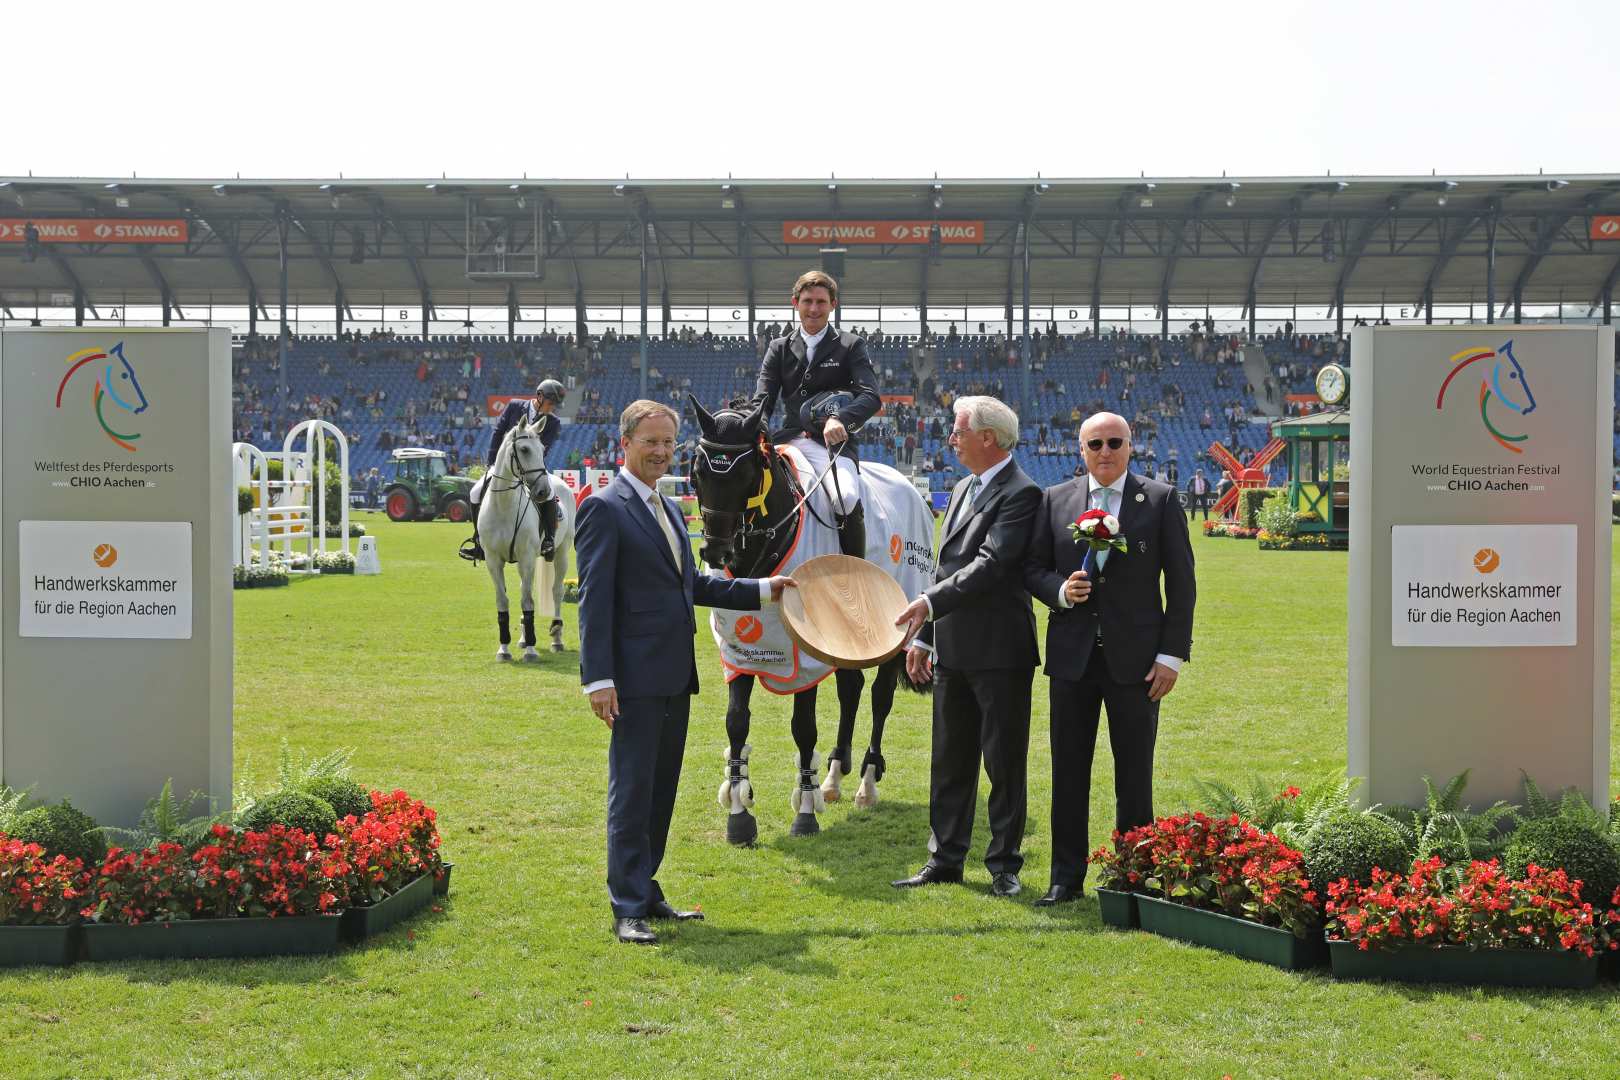 Last to start, Darragh Kenny  jumps to glory in Aachen